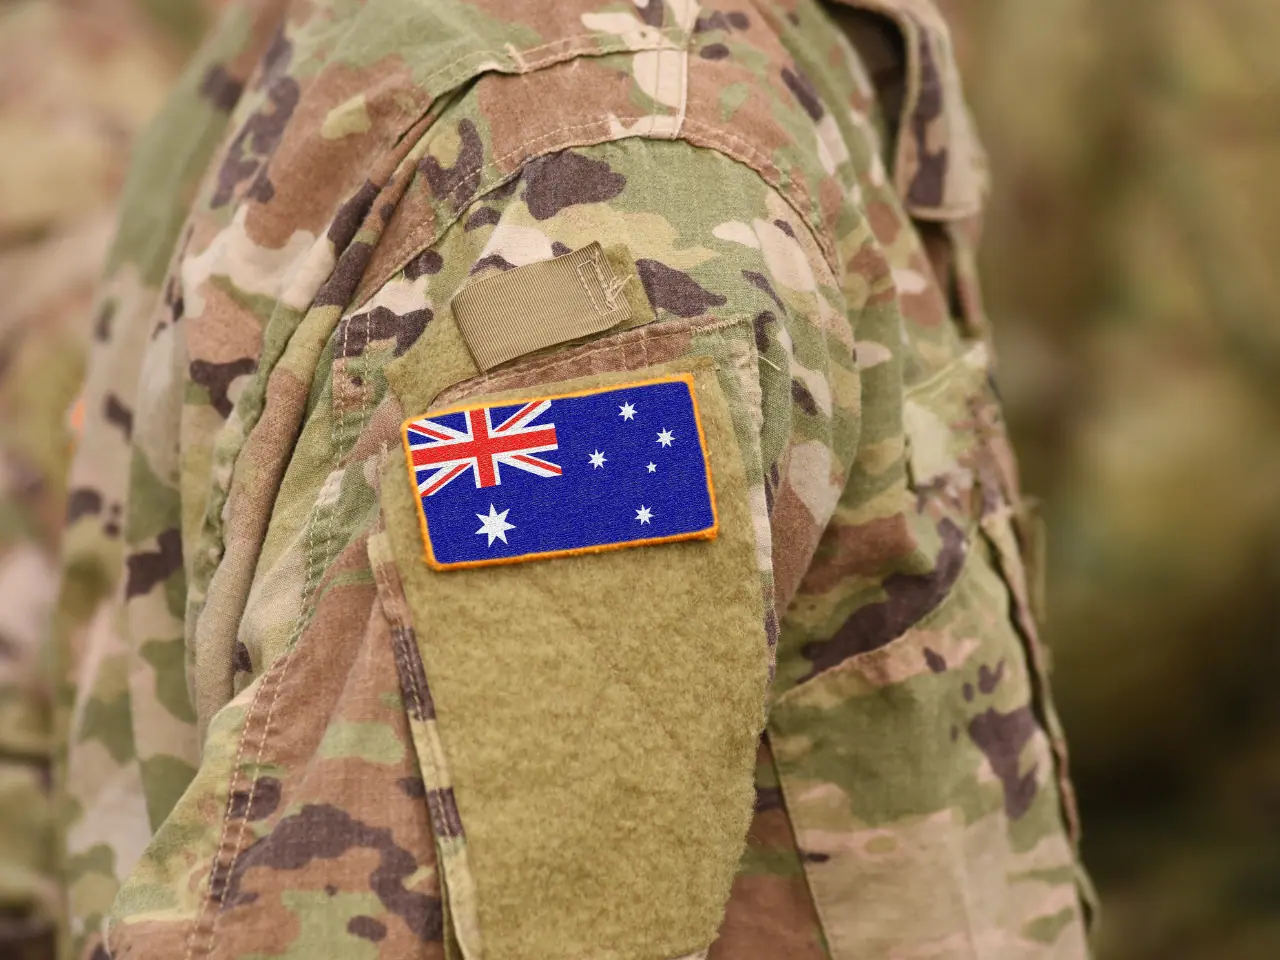 Australian soldier with Australian flag on his shoulder